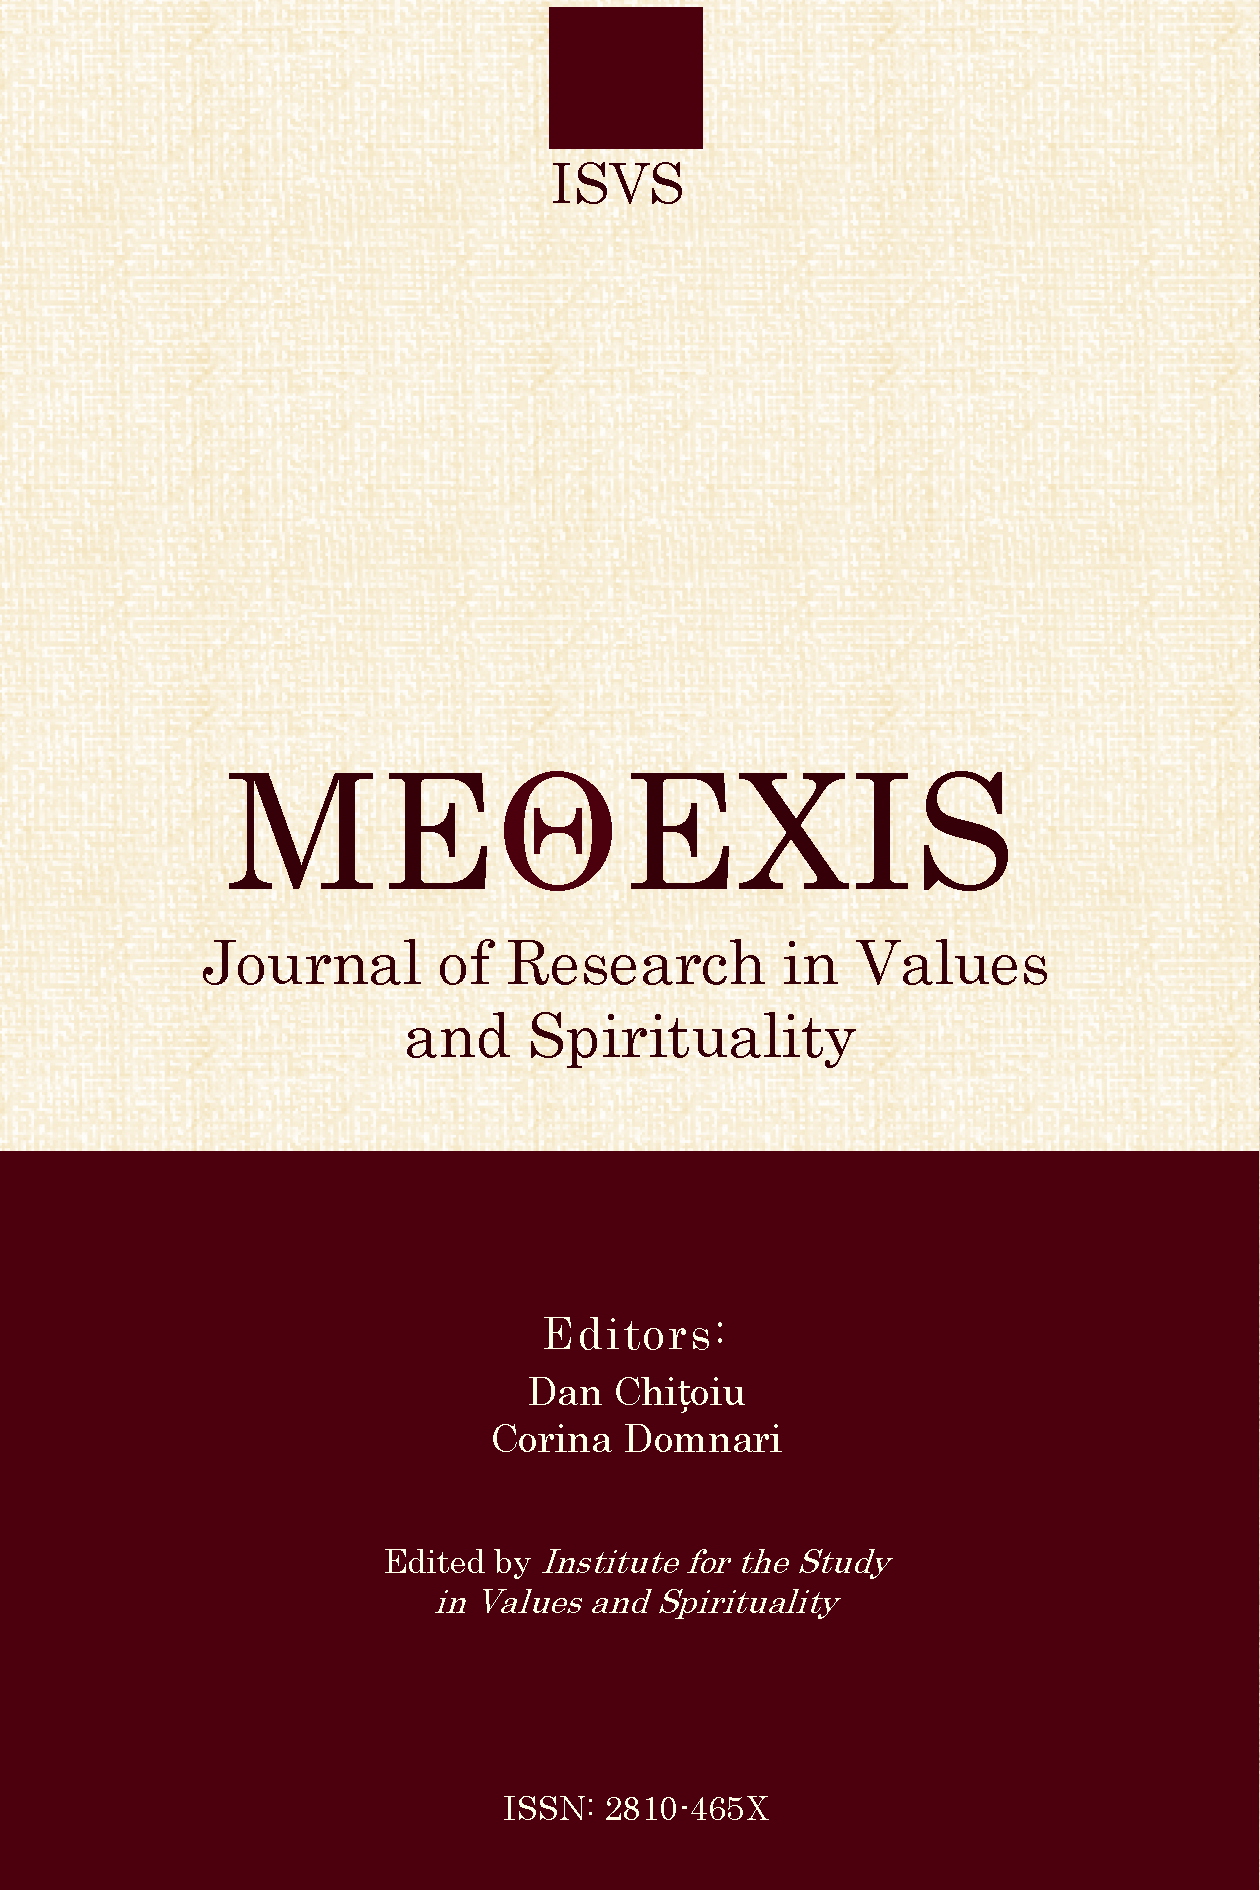 METHEXIS Journal of Research in Values and Spirituality